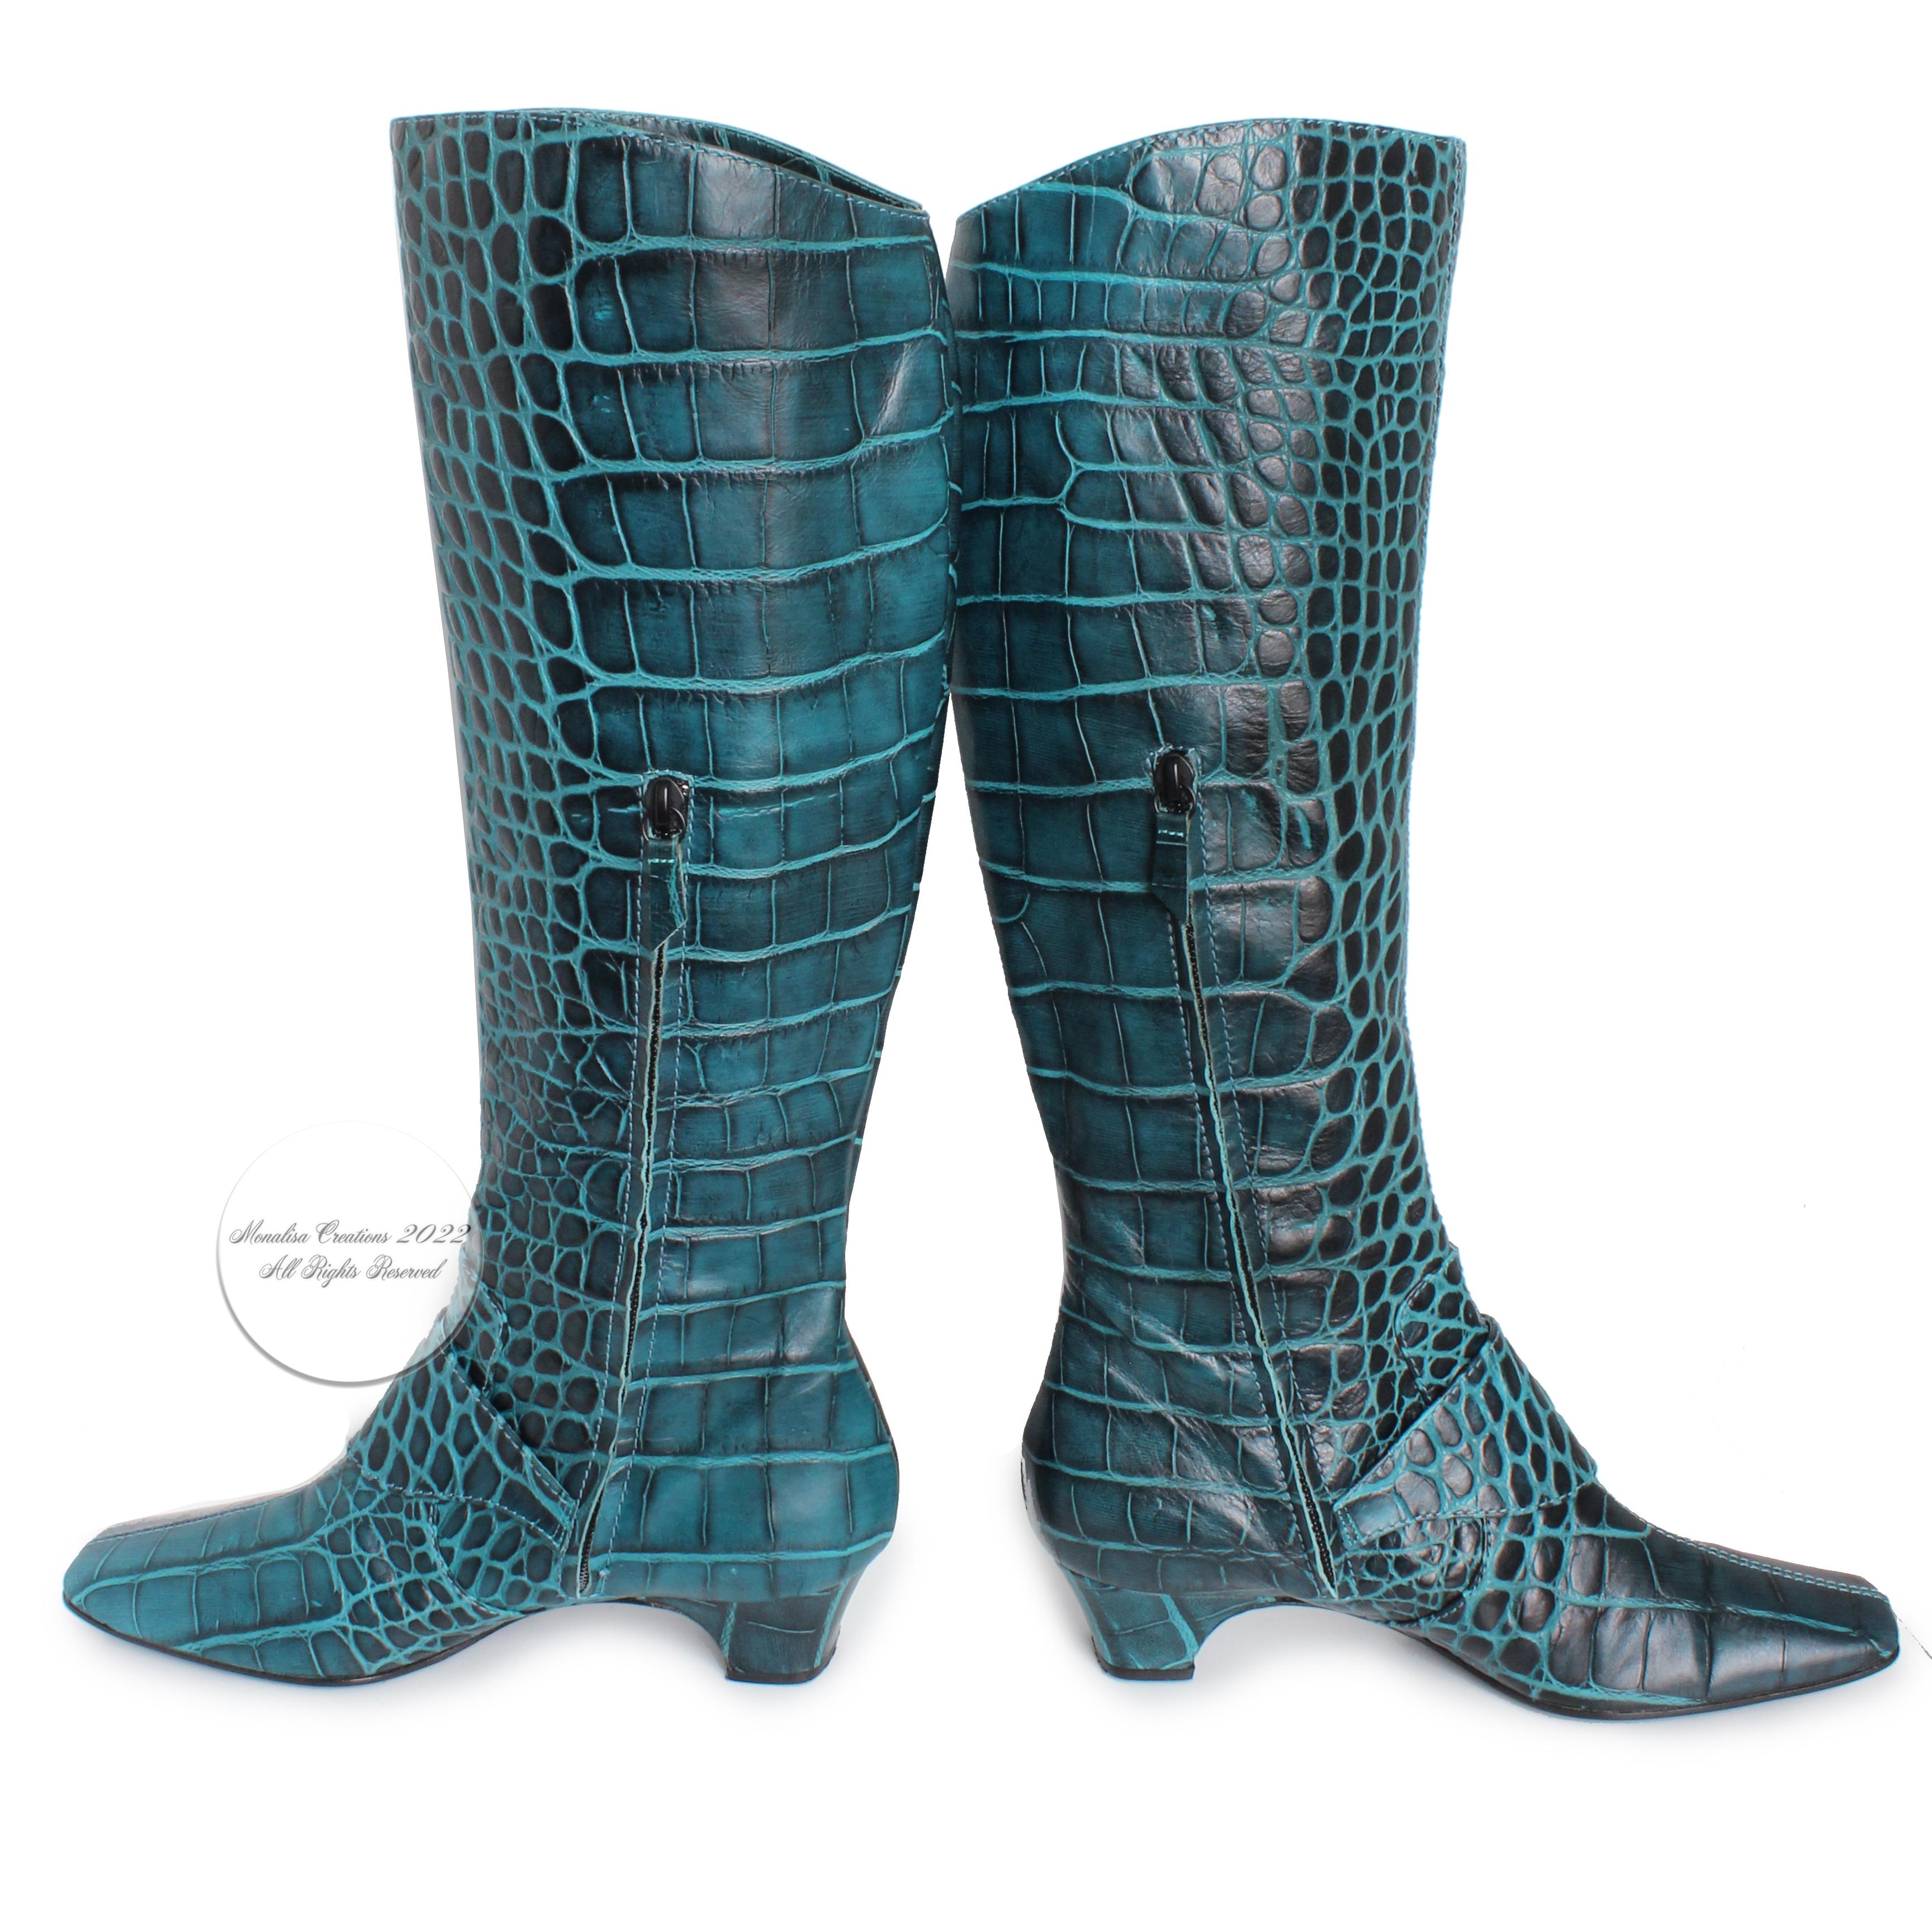 Casadei Boots Croc Embossed Leather Green Blue Made in Italy Vintage Size 9.5  2